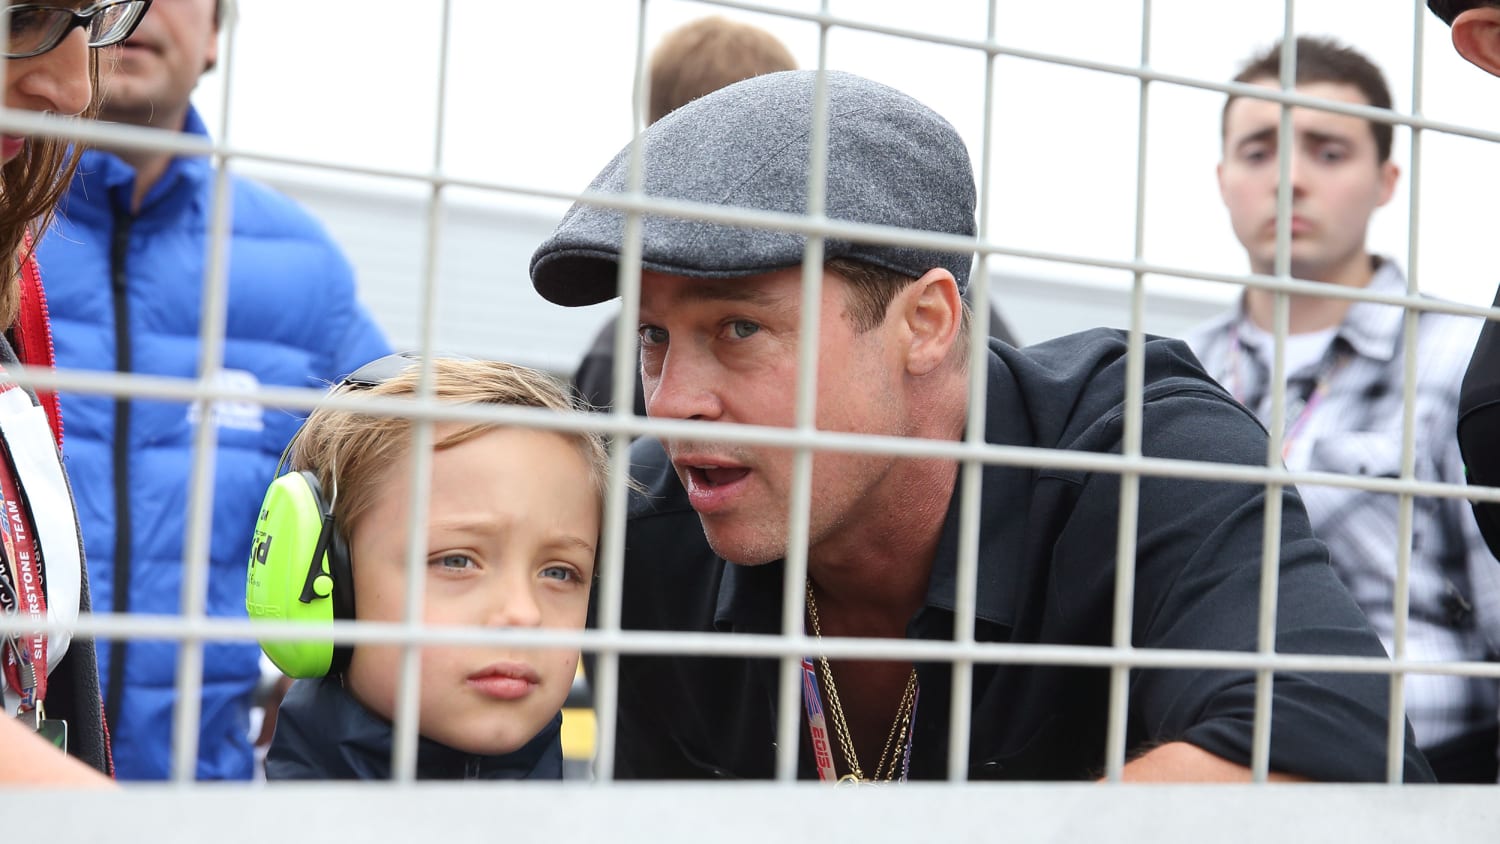 Brad Pitt shares father-son day with Knox at MotoGP British Grand Prix - TODAY.com